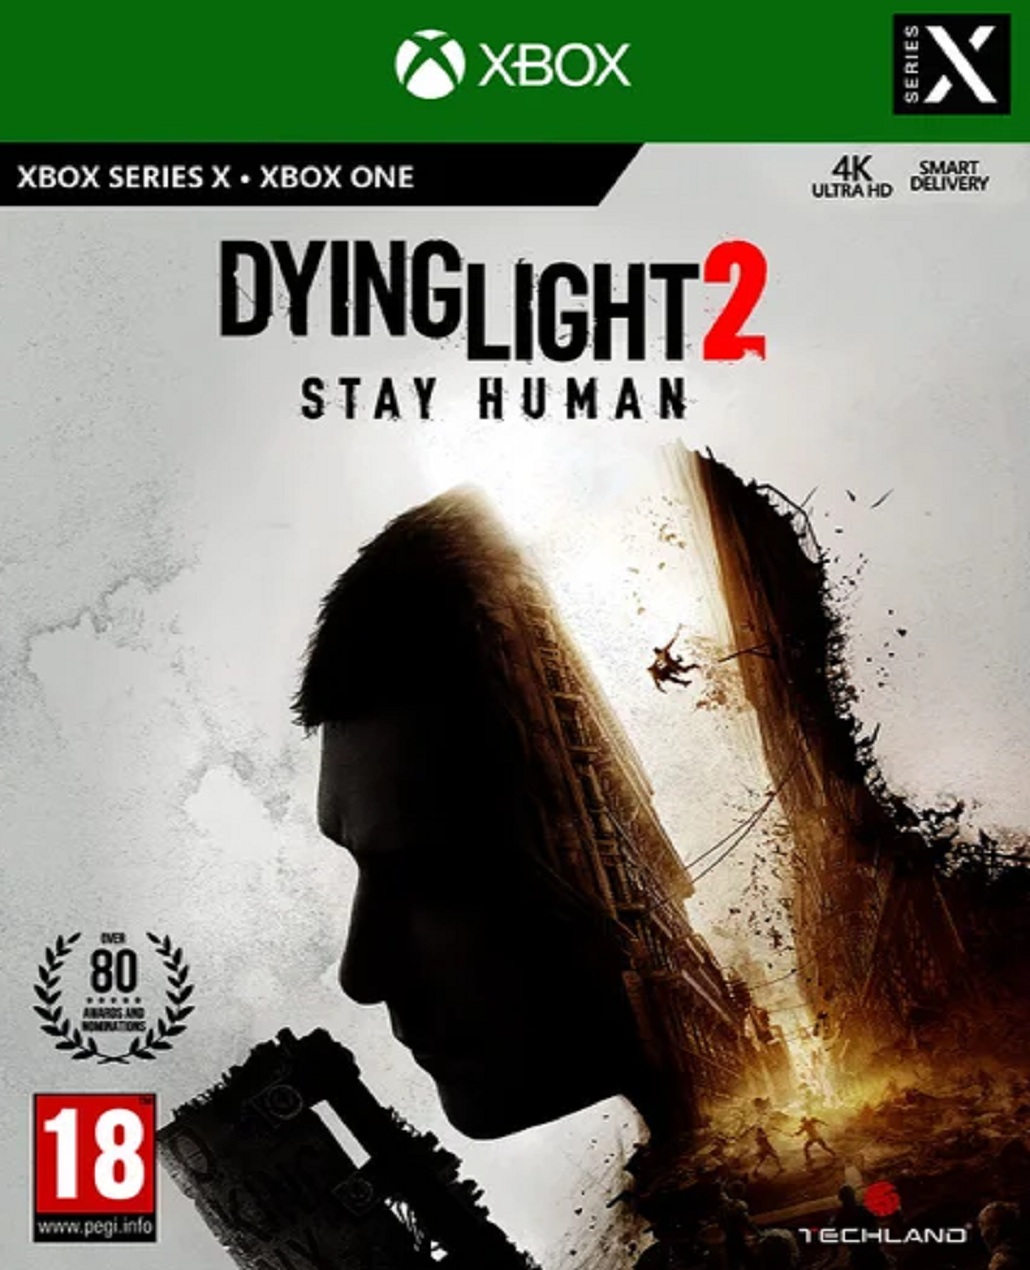 DYING LIGHT 2 - STAY HUMAN (XBOX ONE / SERIES - BAZAR)